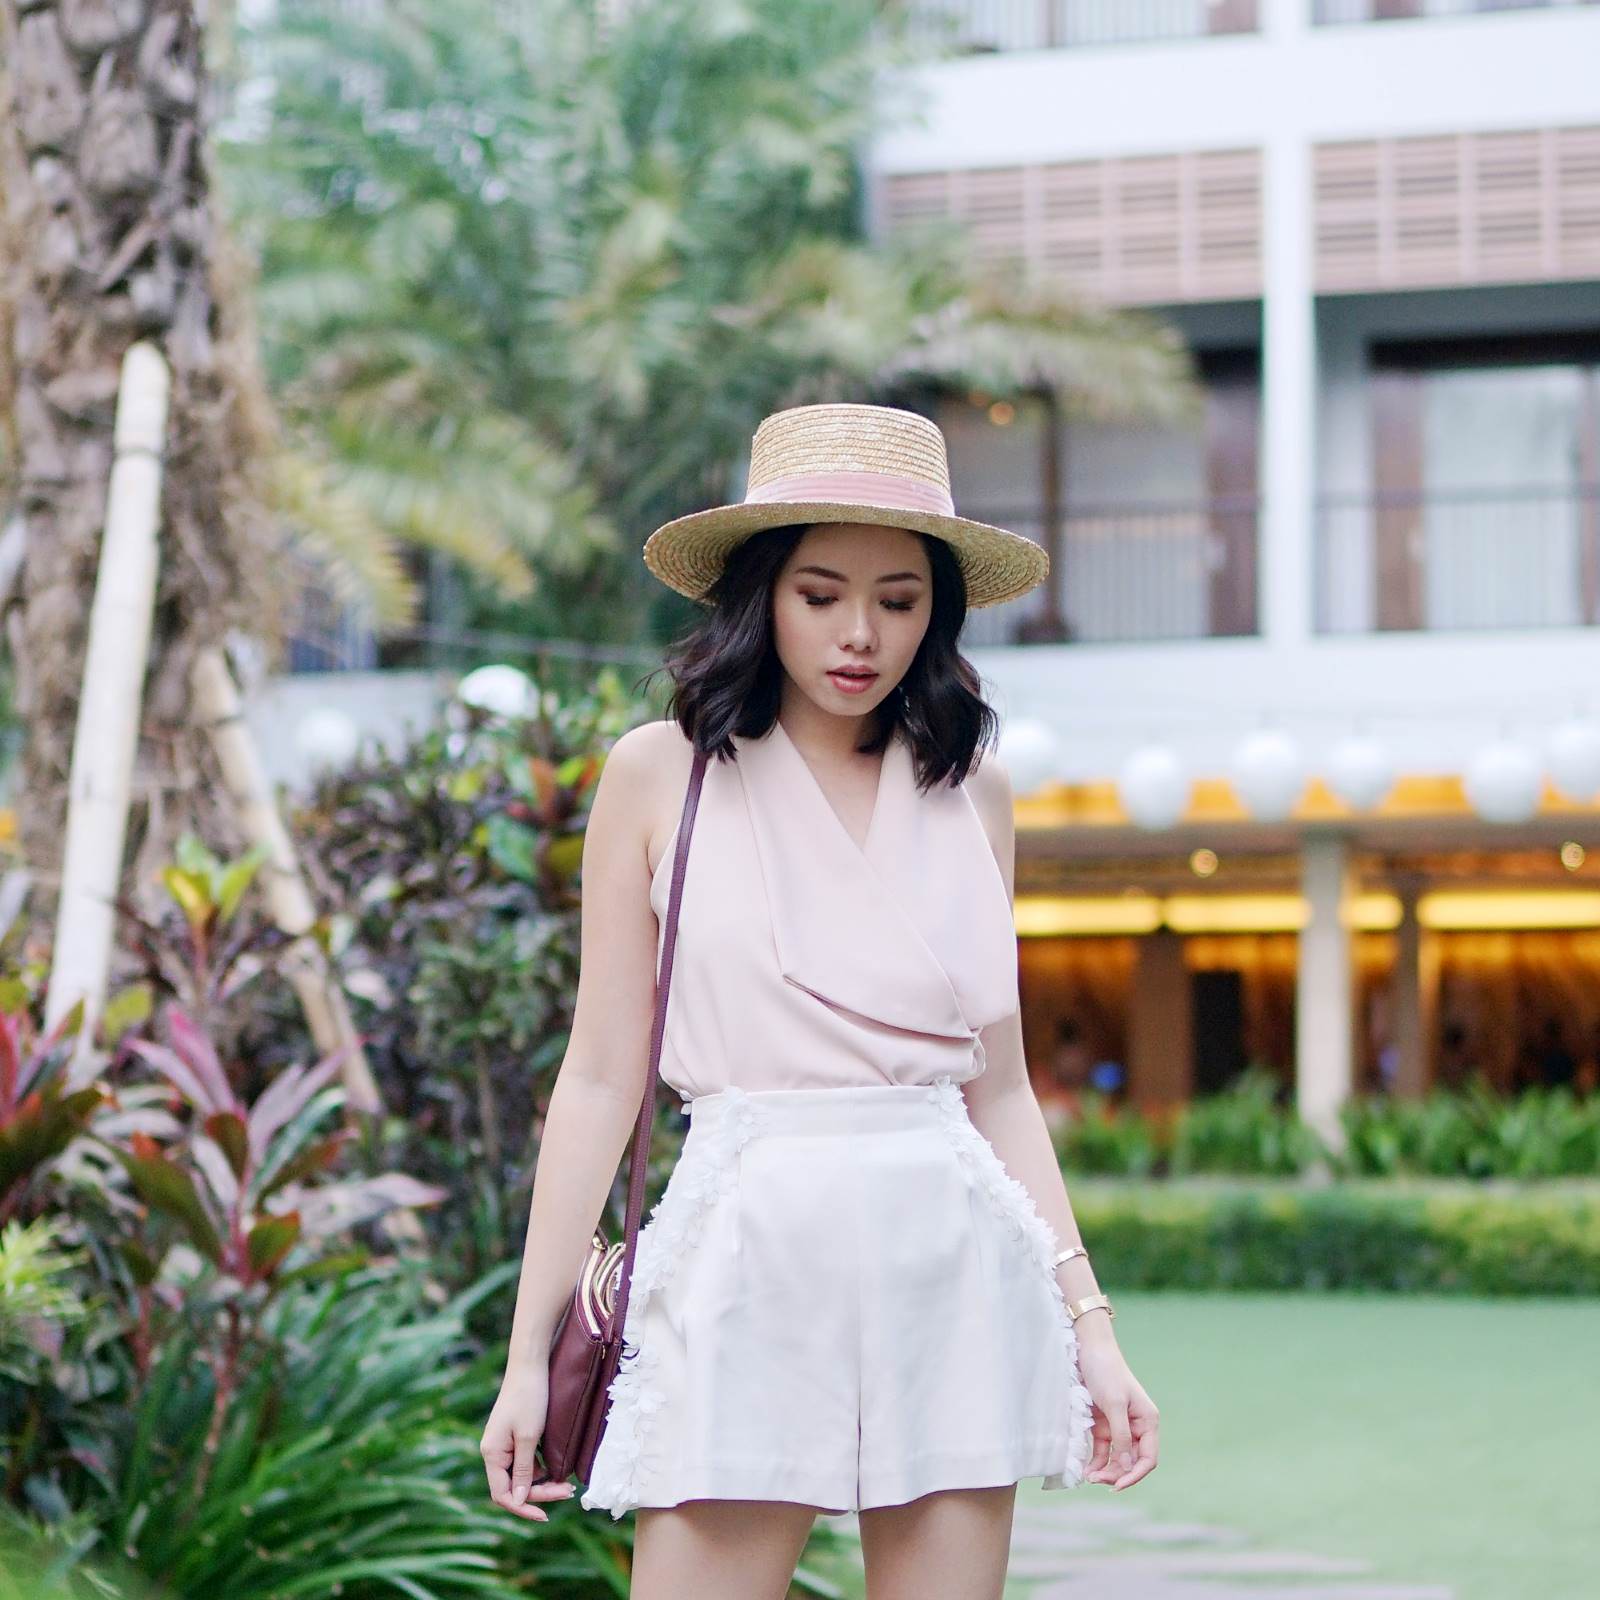 HOW TO DRESS FASHIONABLY IN TROPICAL ISLAND (WITHOUT SHOWING TOO MUCH ...